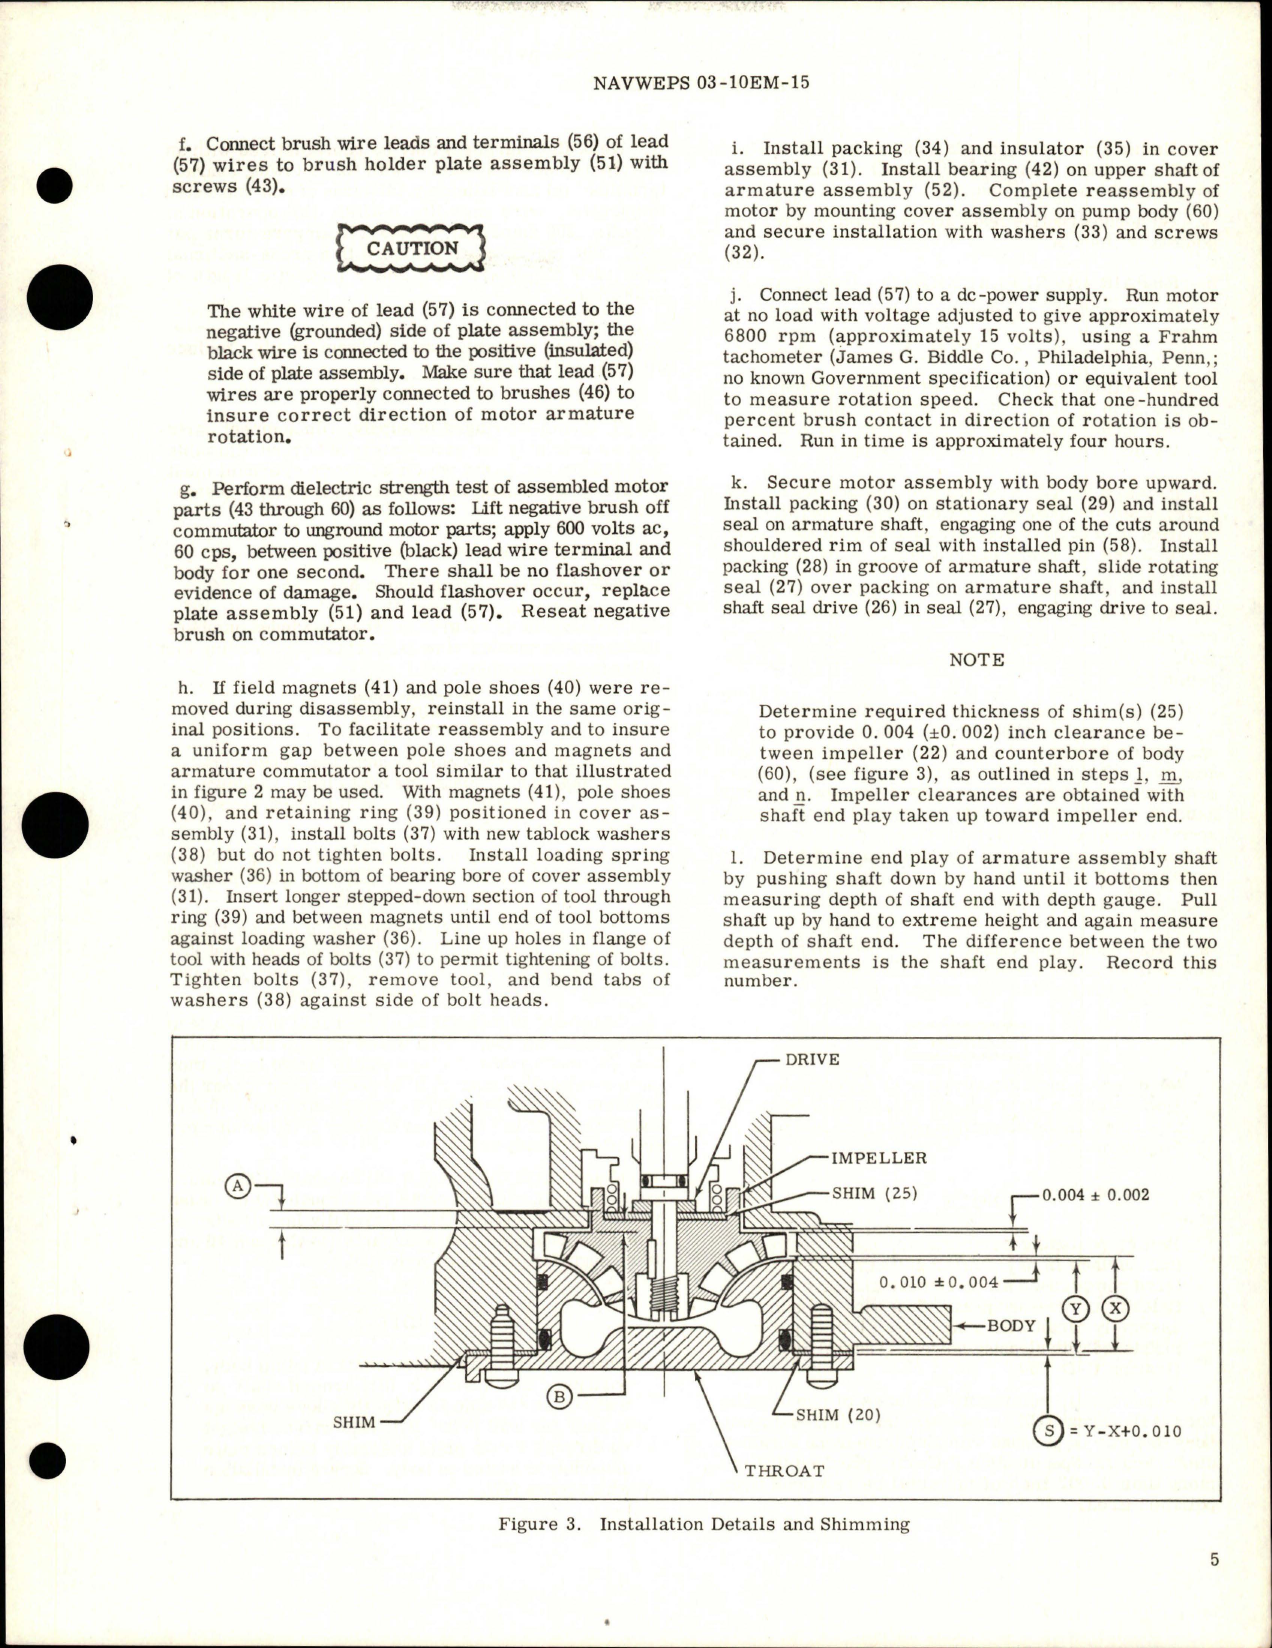 Sample page 7 from AirCorps Library document: Overhaul Instructions with Parts Breakdown for Fuel Booster Pump - Part 56881